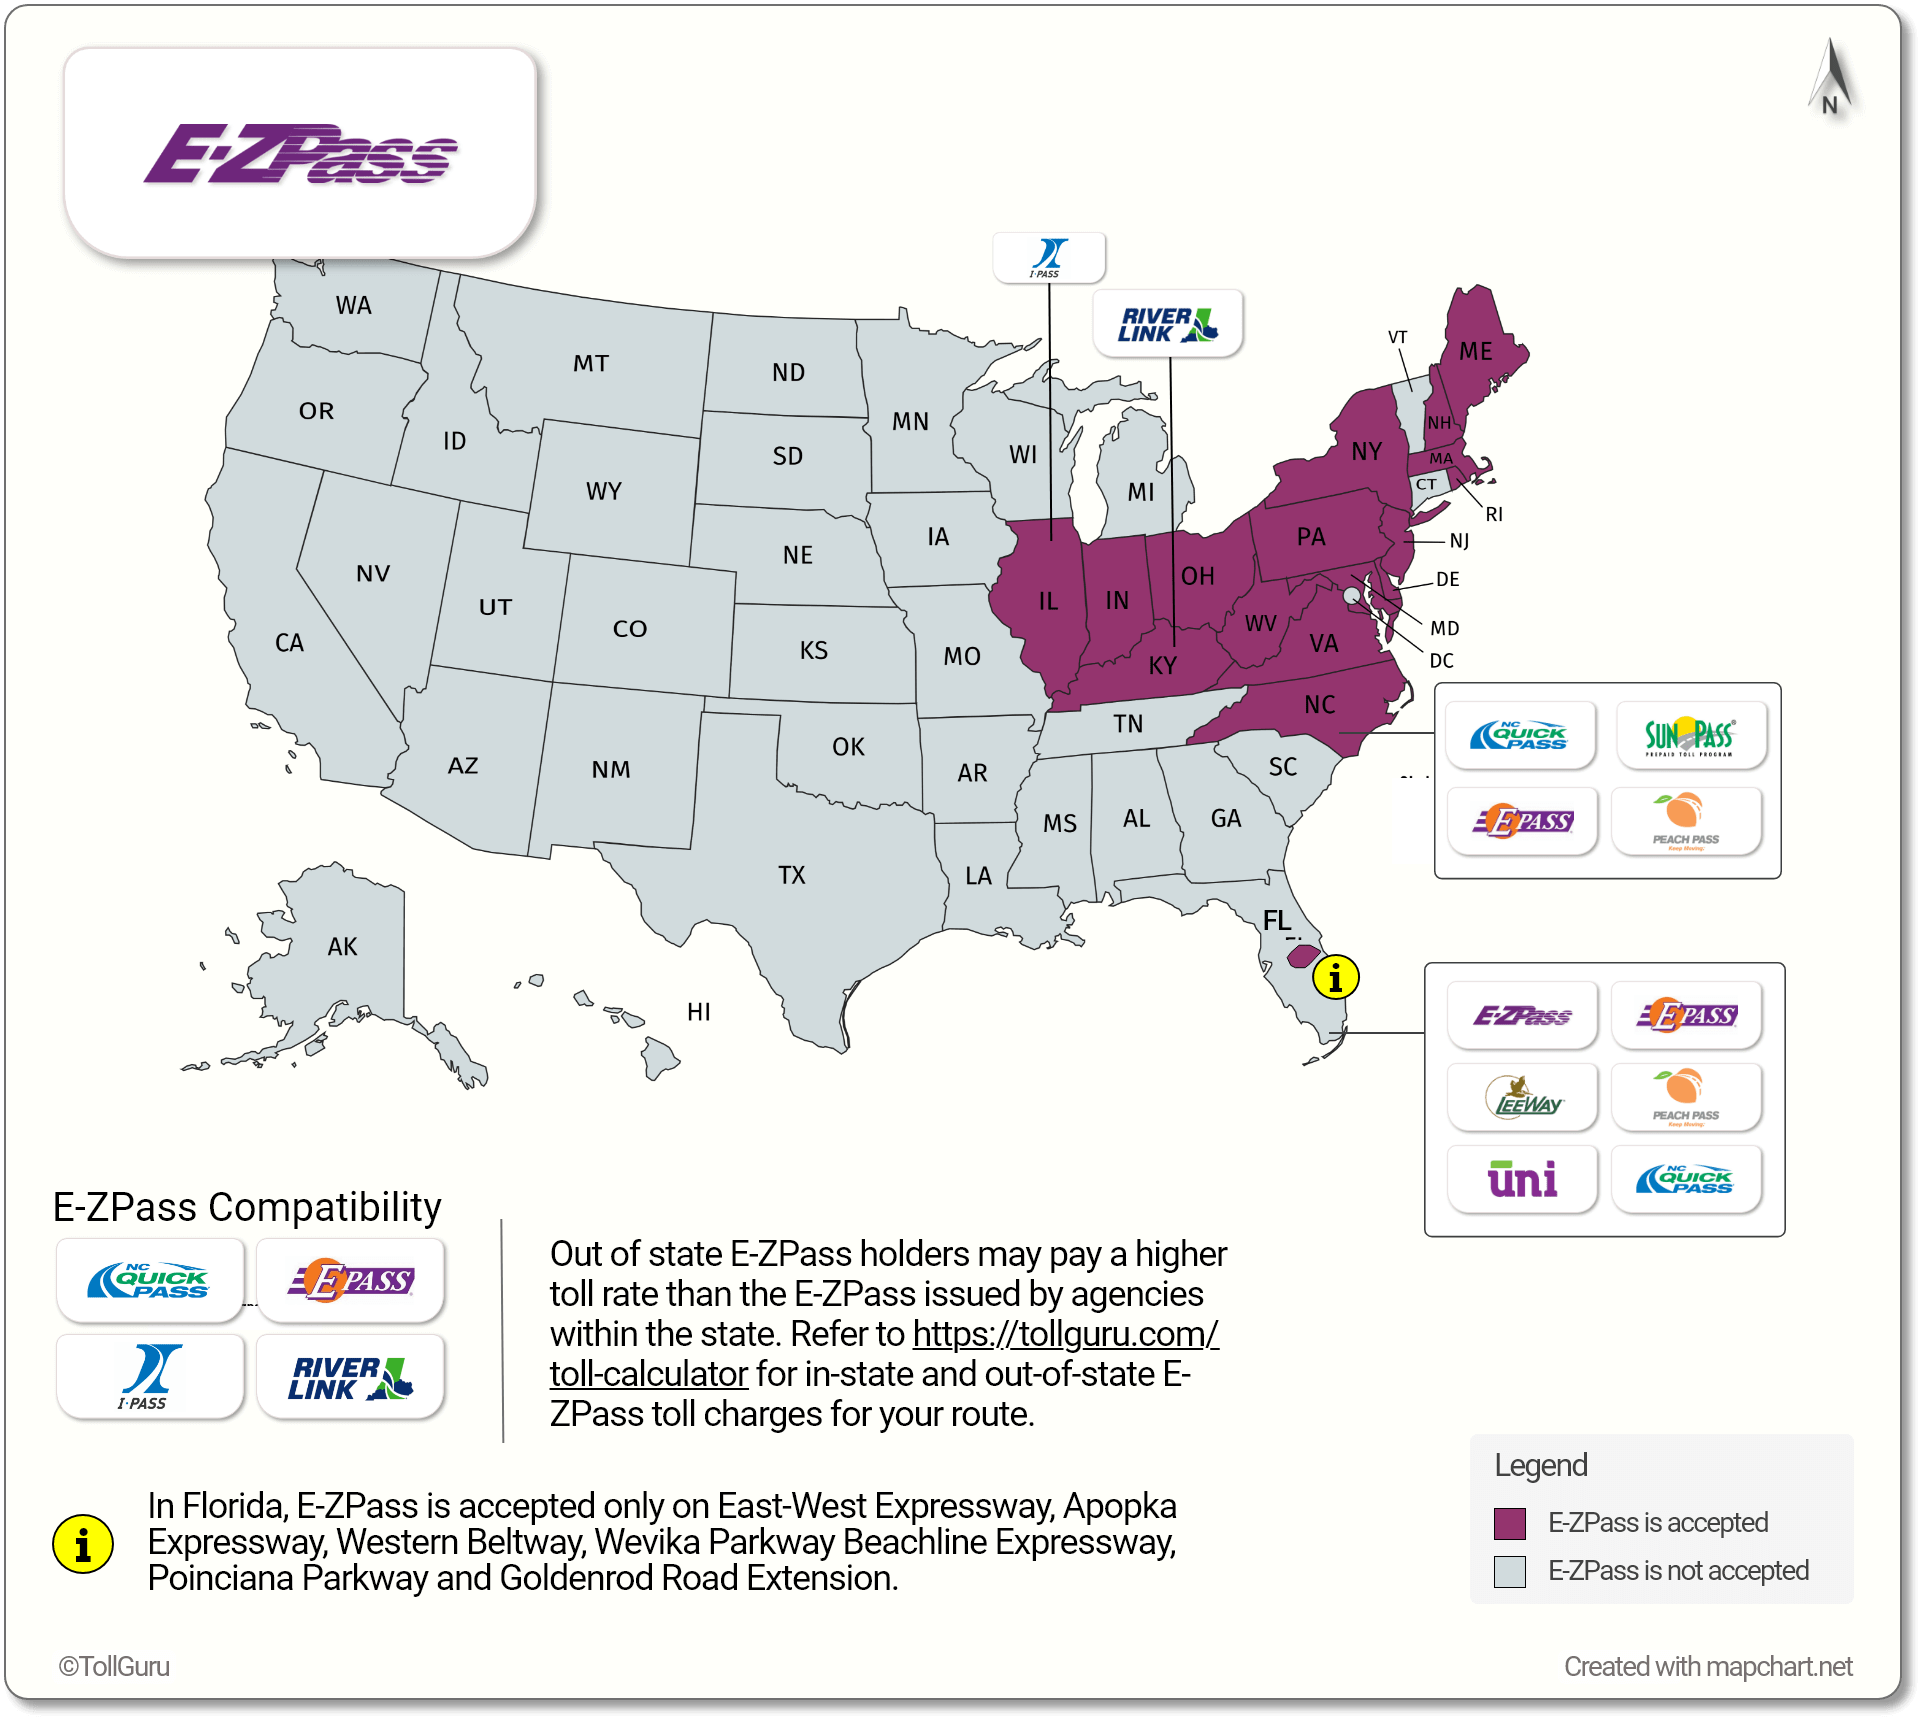 E-ZPass is accepted in New York. New Jersey, Central Florida and other states with I-Pass, E-Pass NCQuickPass and RiverLink